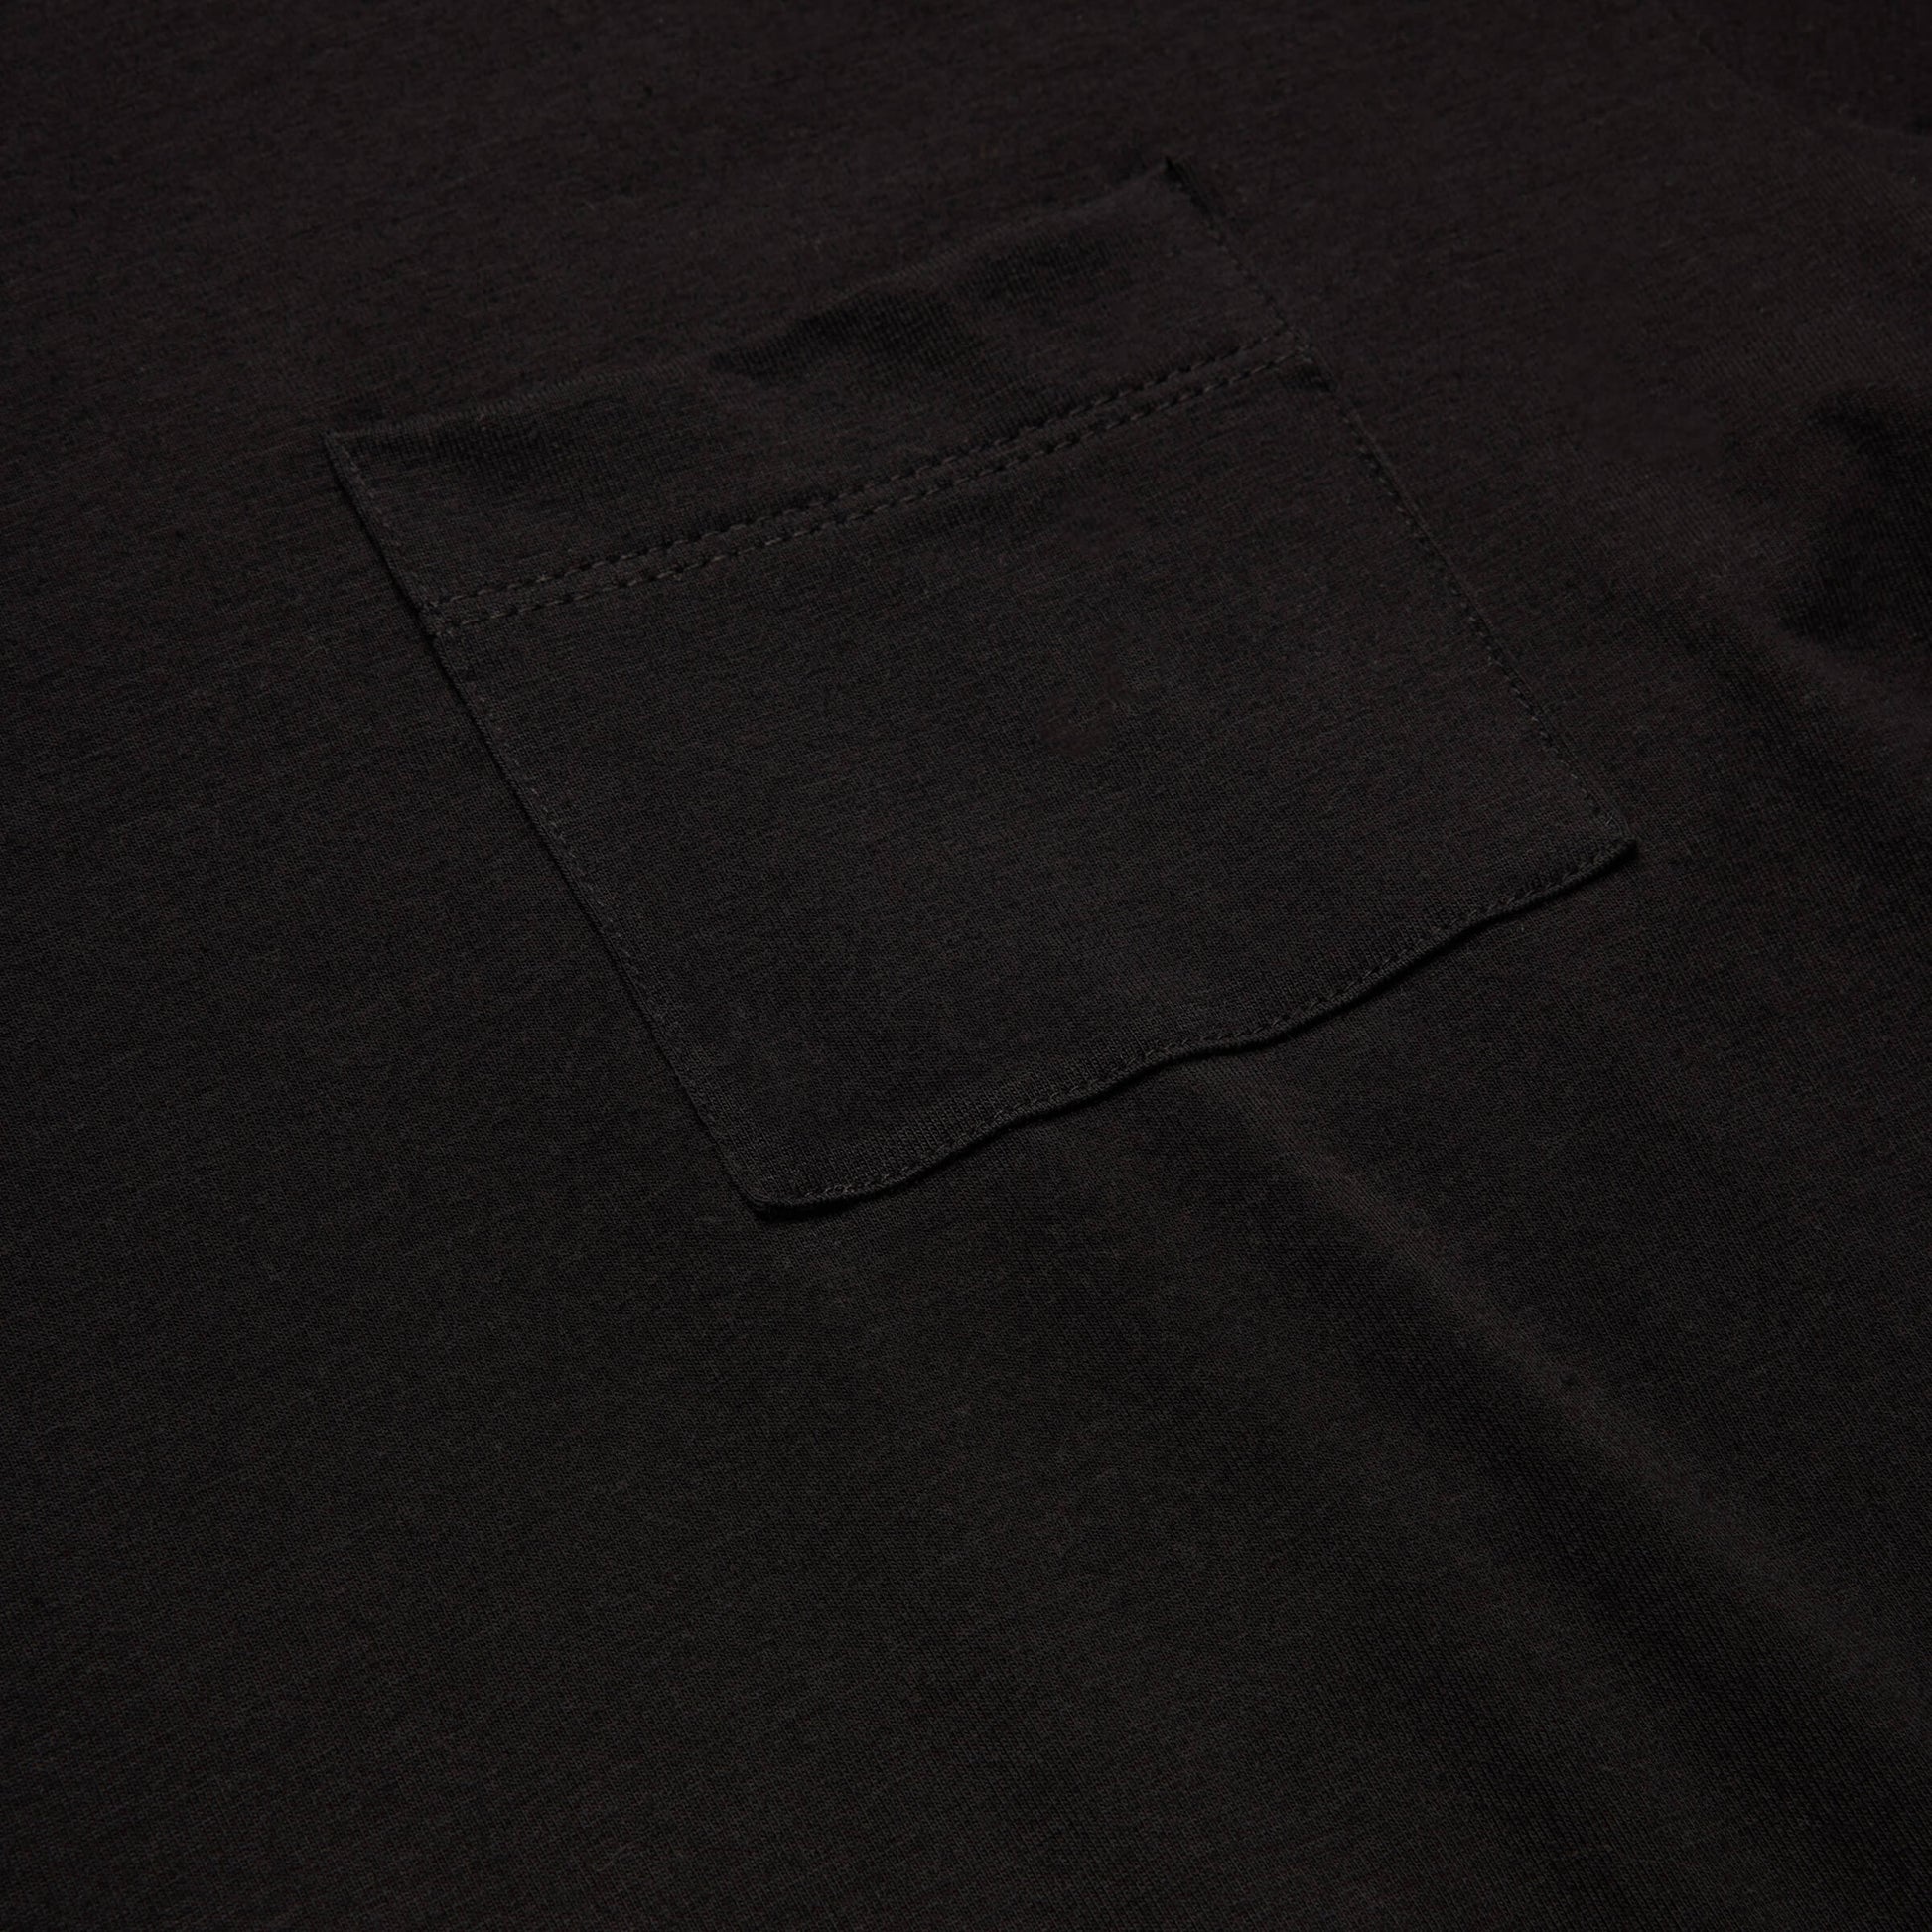 Detailed view of the Slumber Cloud Essential Pocket Tee made with Outlast temperature regulation technology